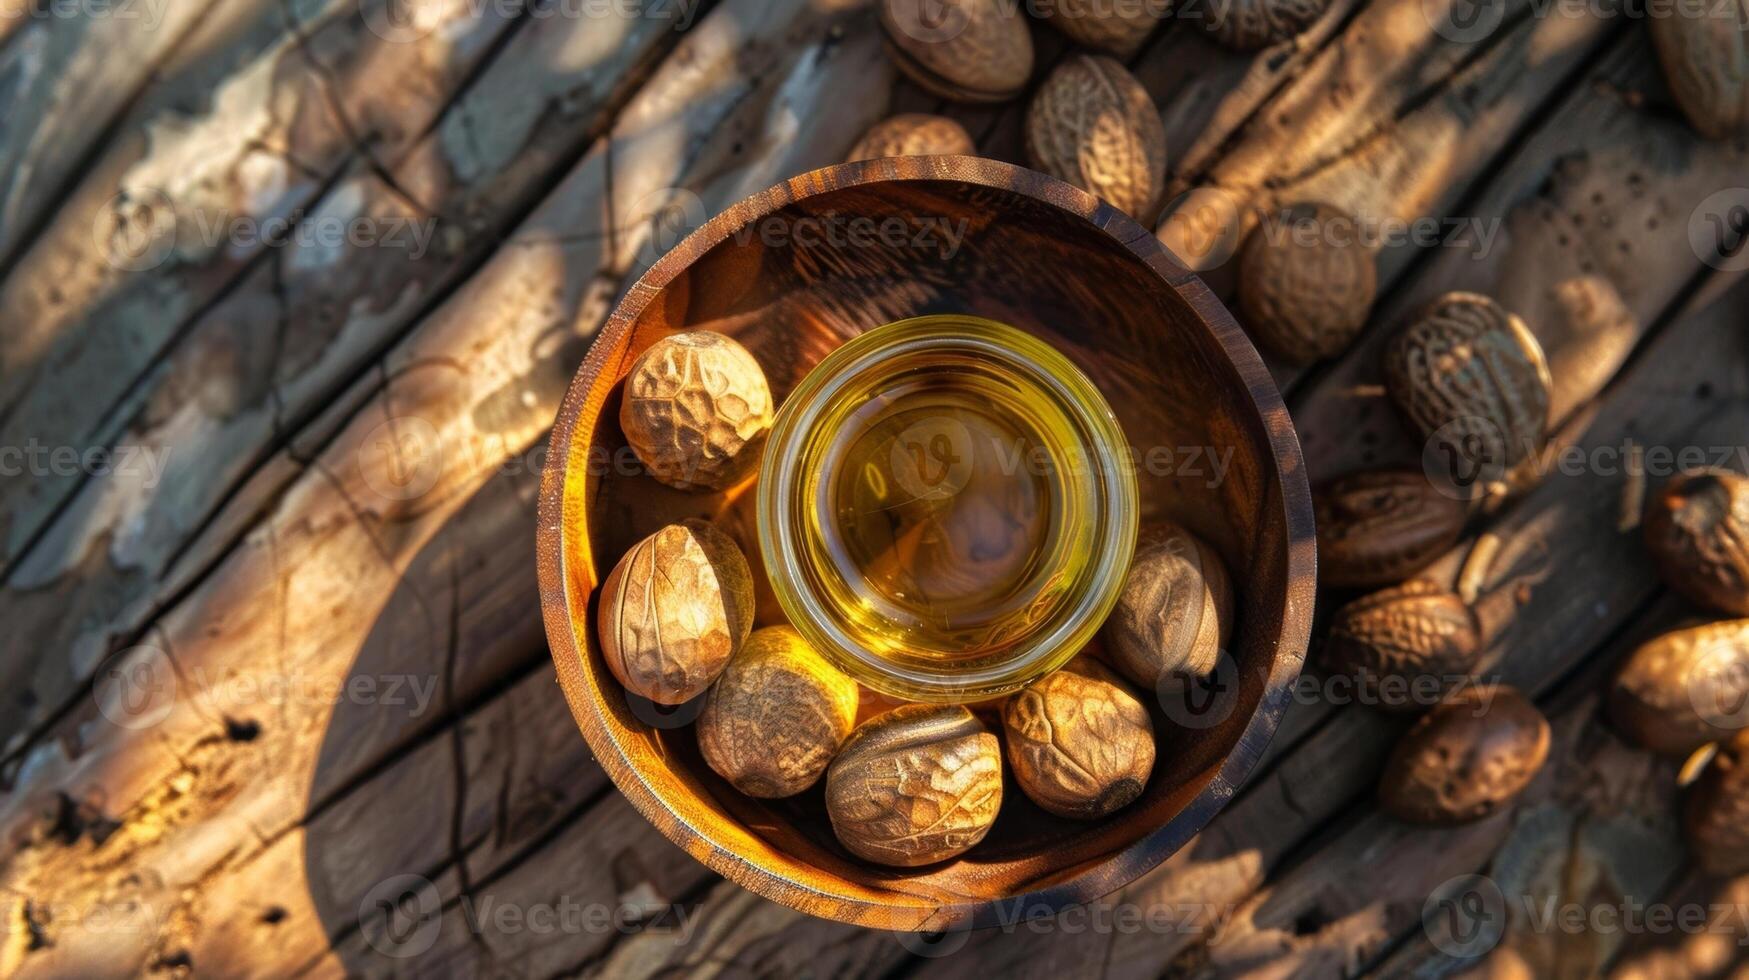 A unique and versatile cooking oil made from shea nuts sourced from trees found in tropical regions providing a delicate nutty flavor to dishes without overwhelming other flavors photo